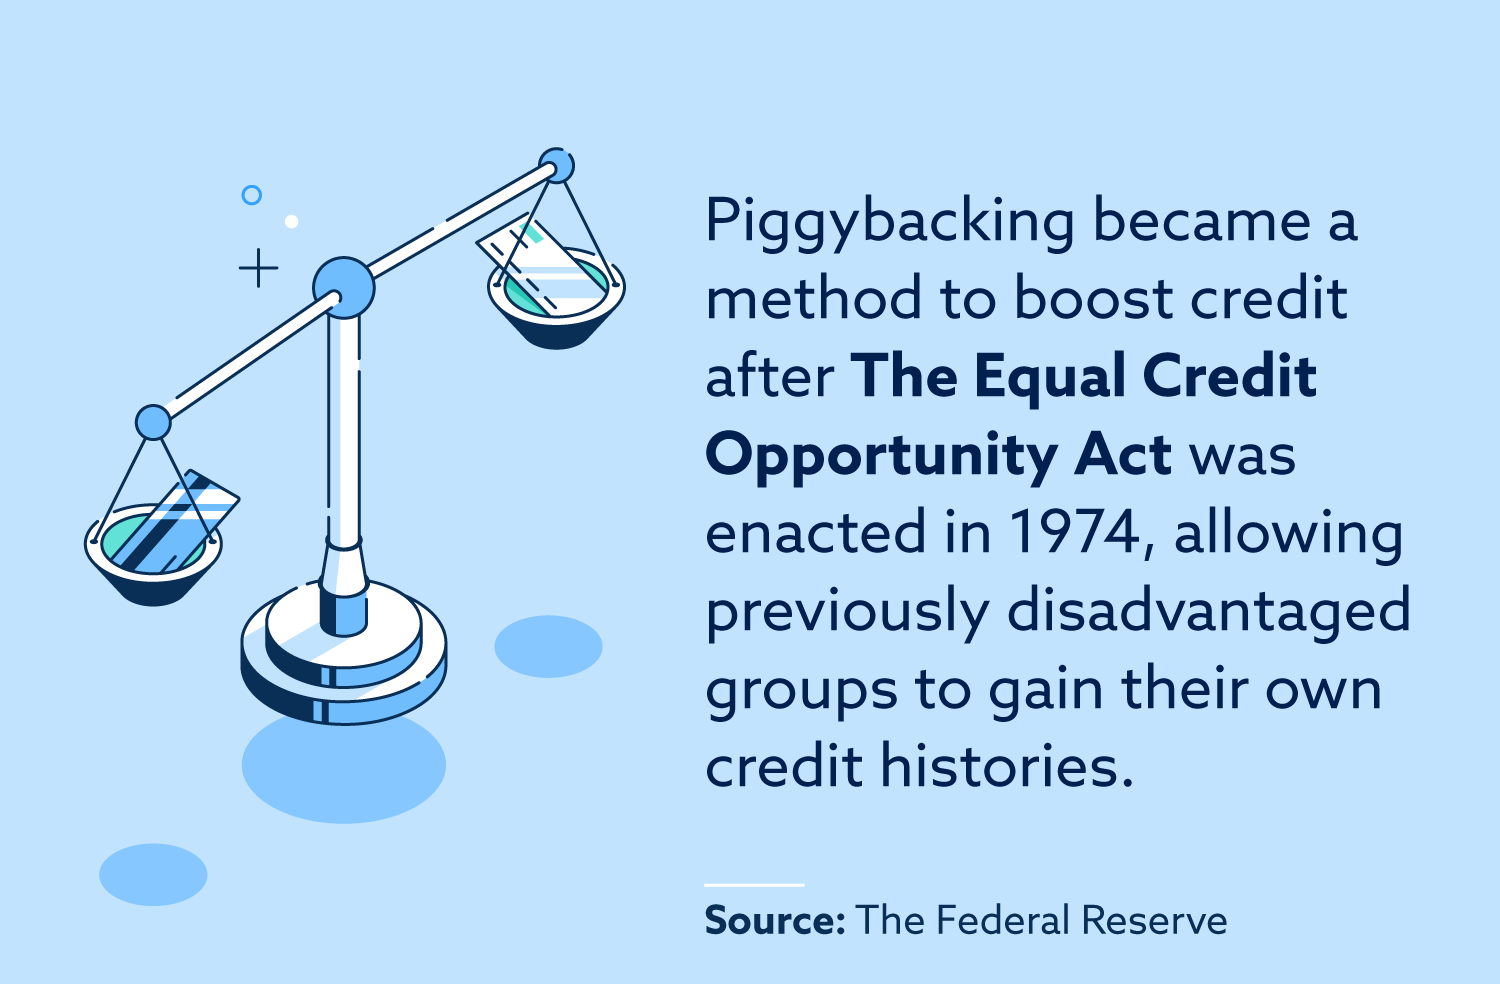 Piggybacking became a method to boost credit after The Equal Opportunity Act was enacted in 1974, allowing previously disadvantaged groups to gain their own credit histories.